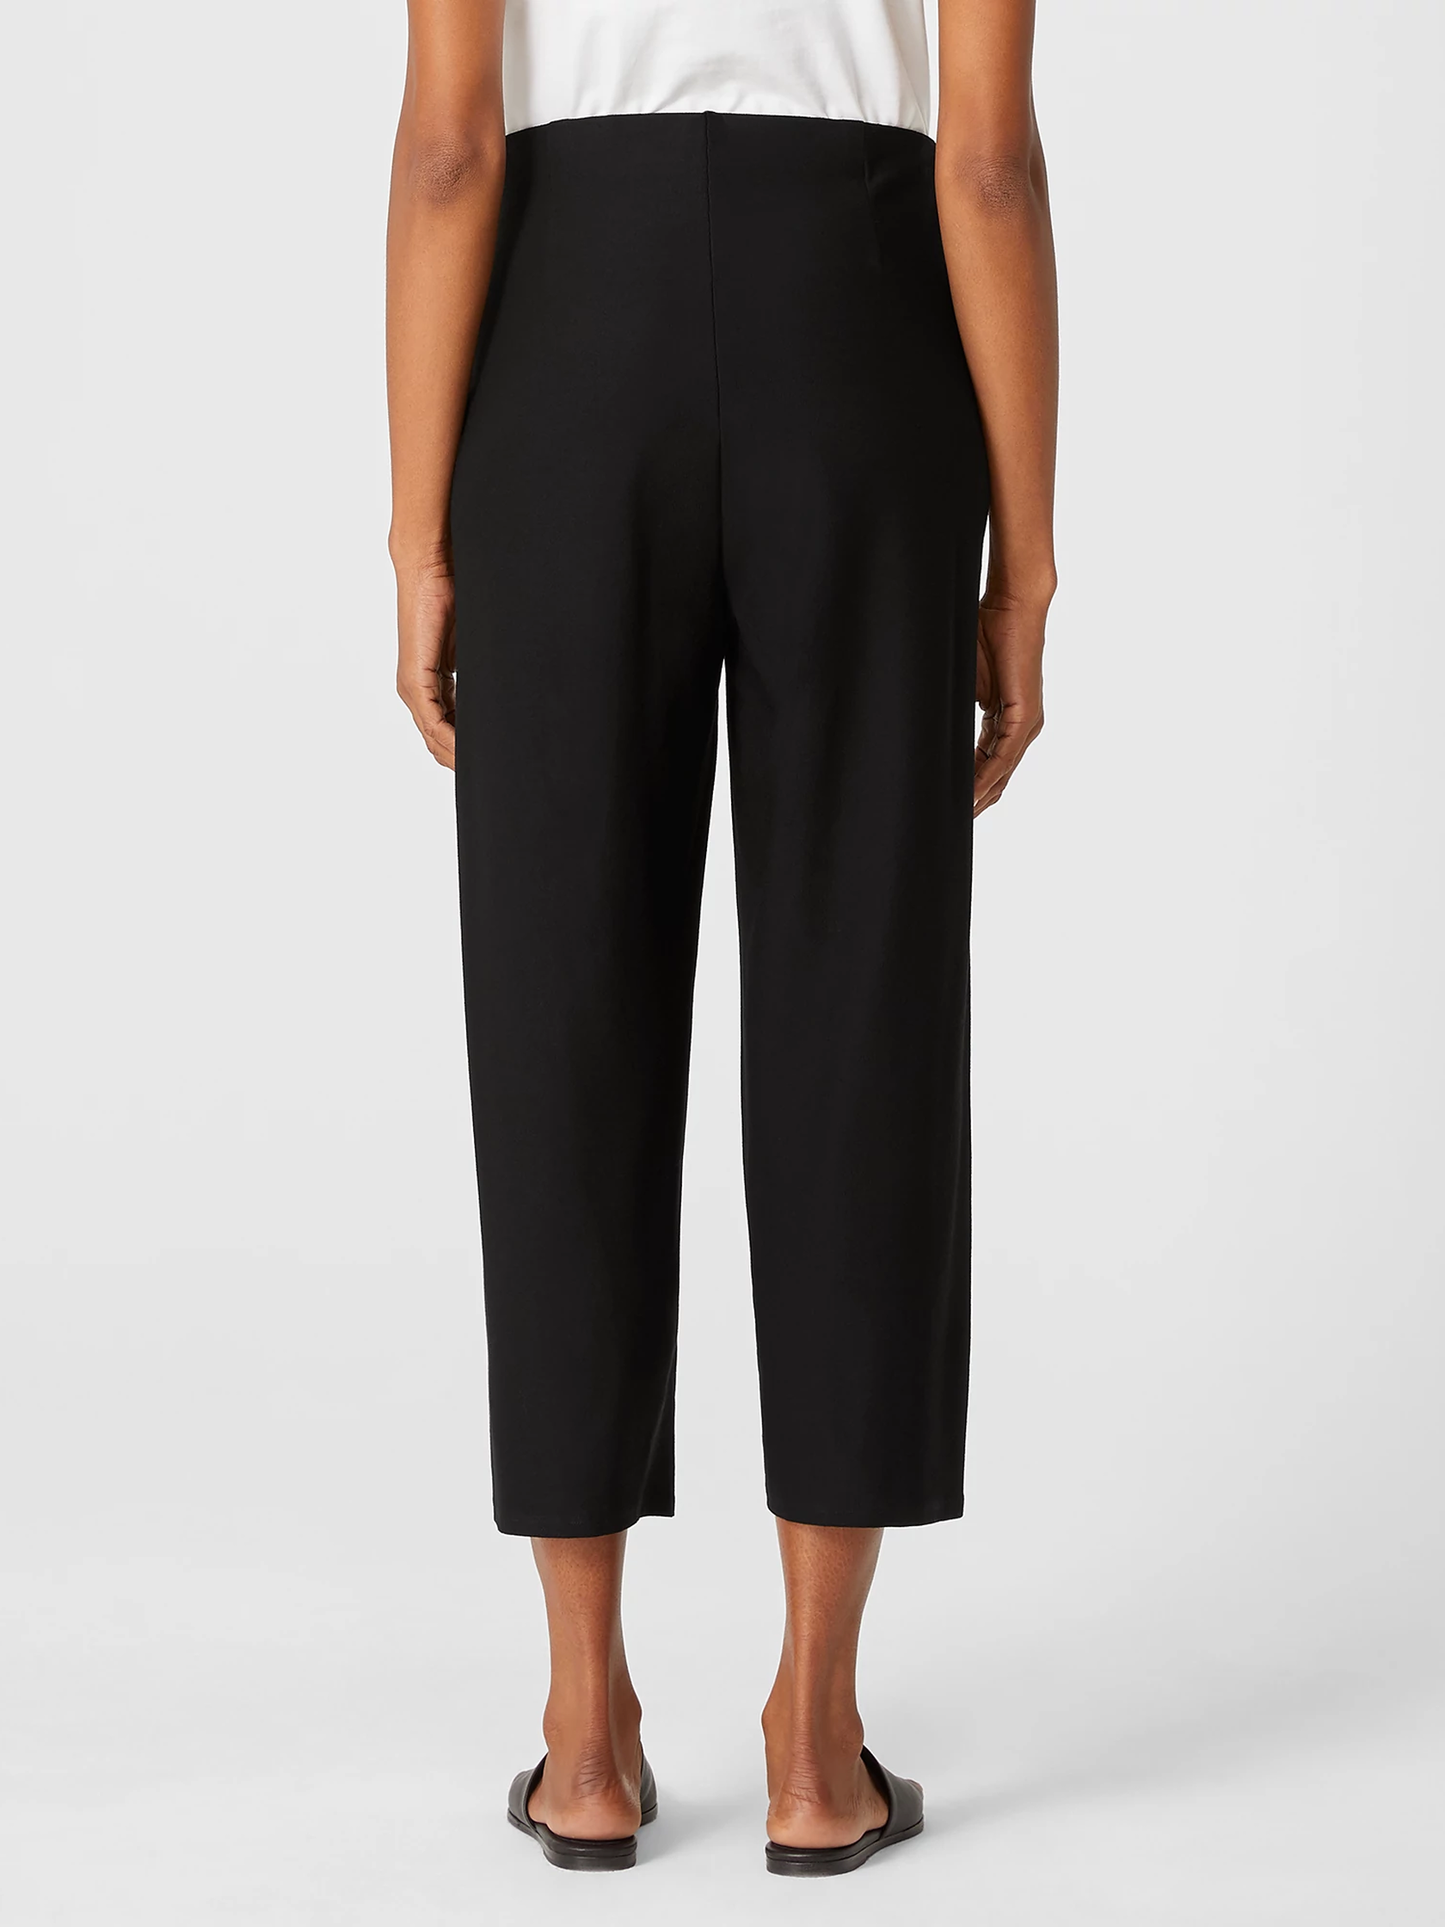 Eileen Fisher Stretch Crepe Pant